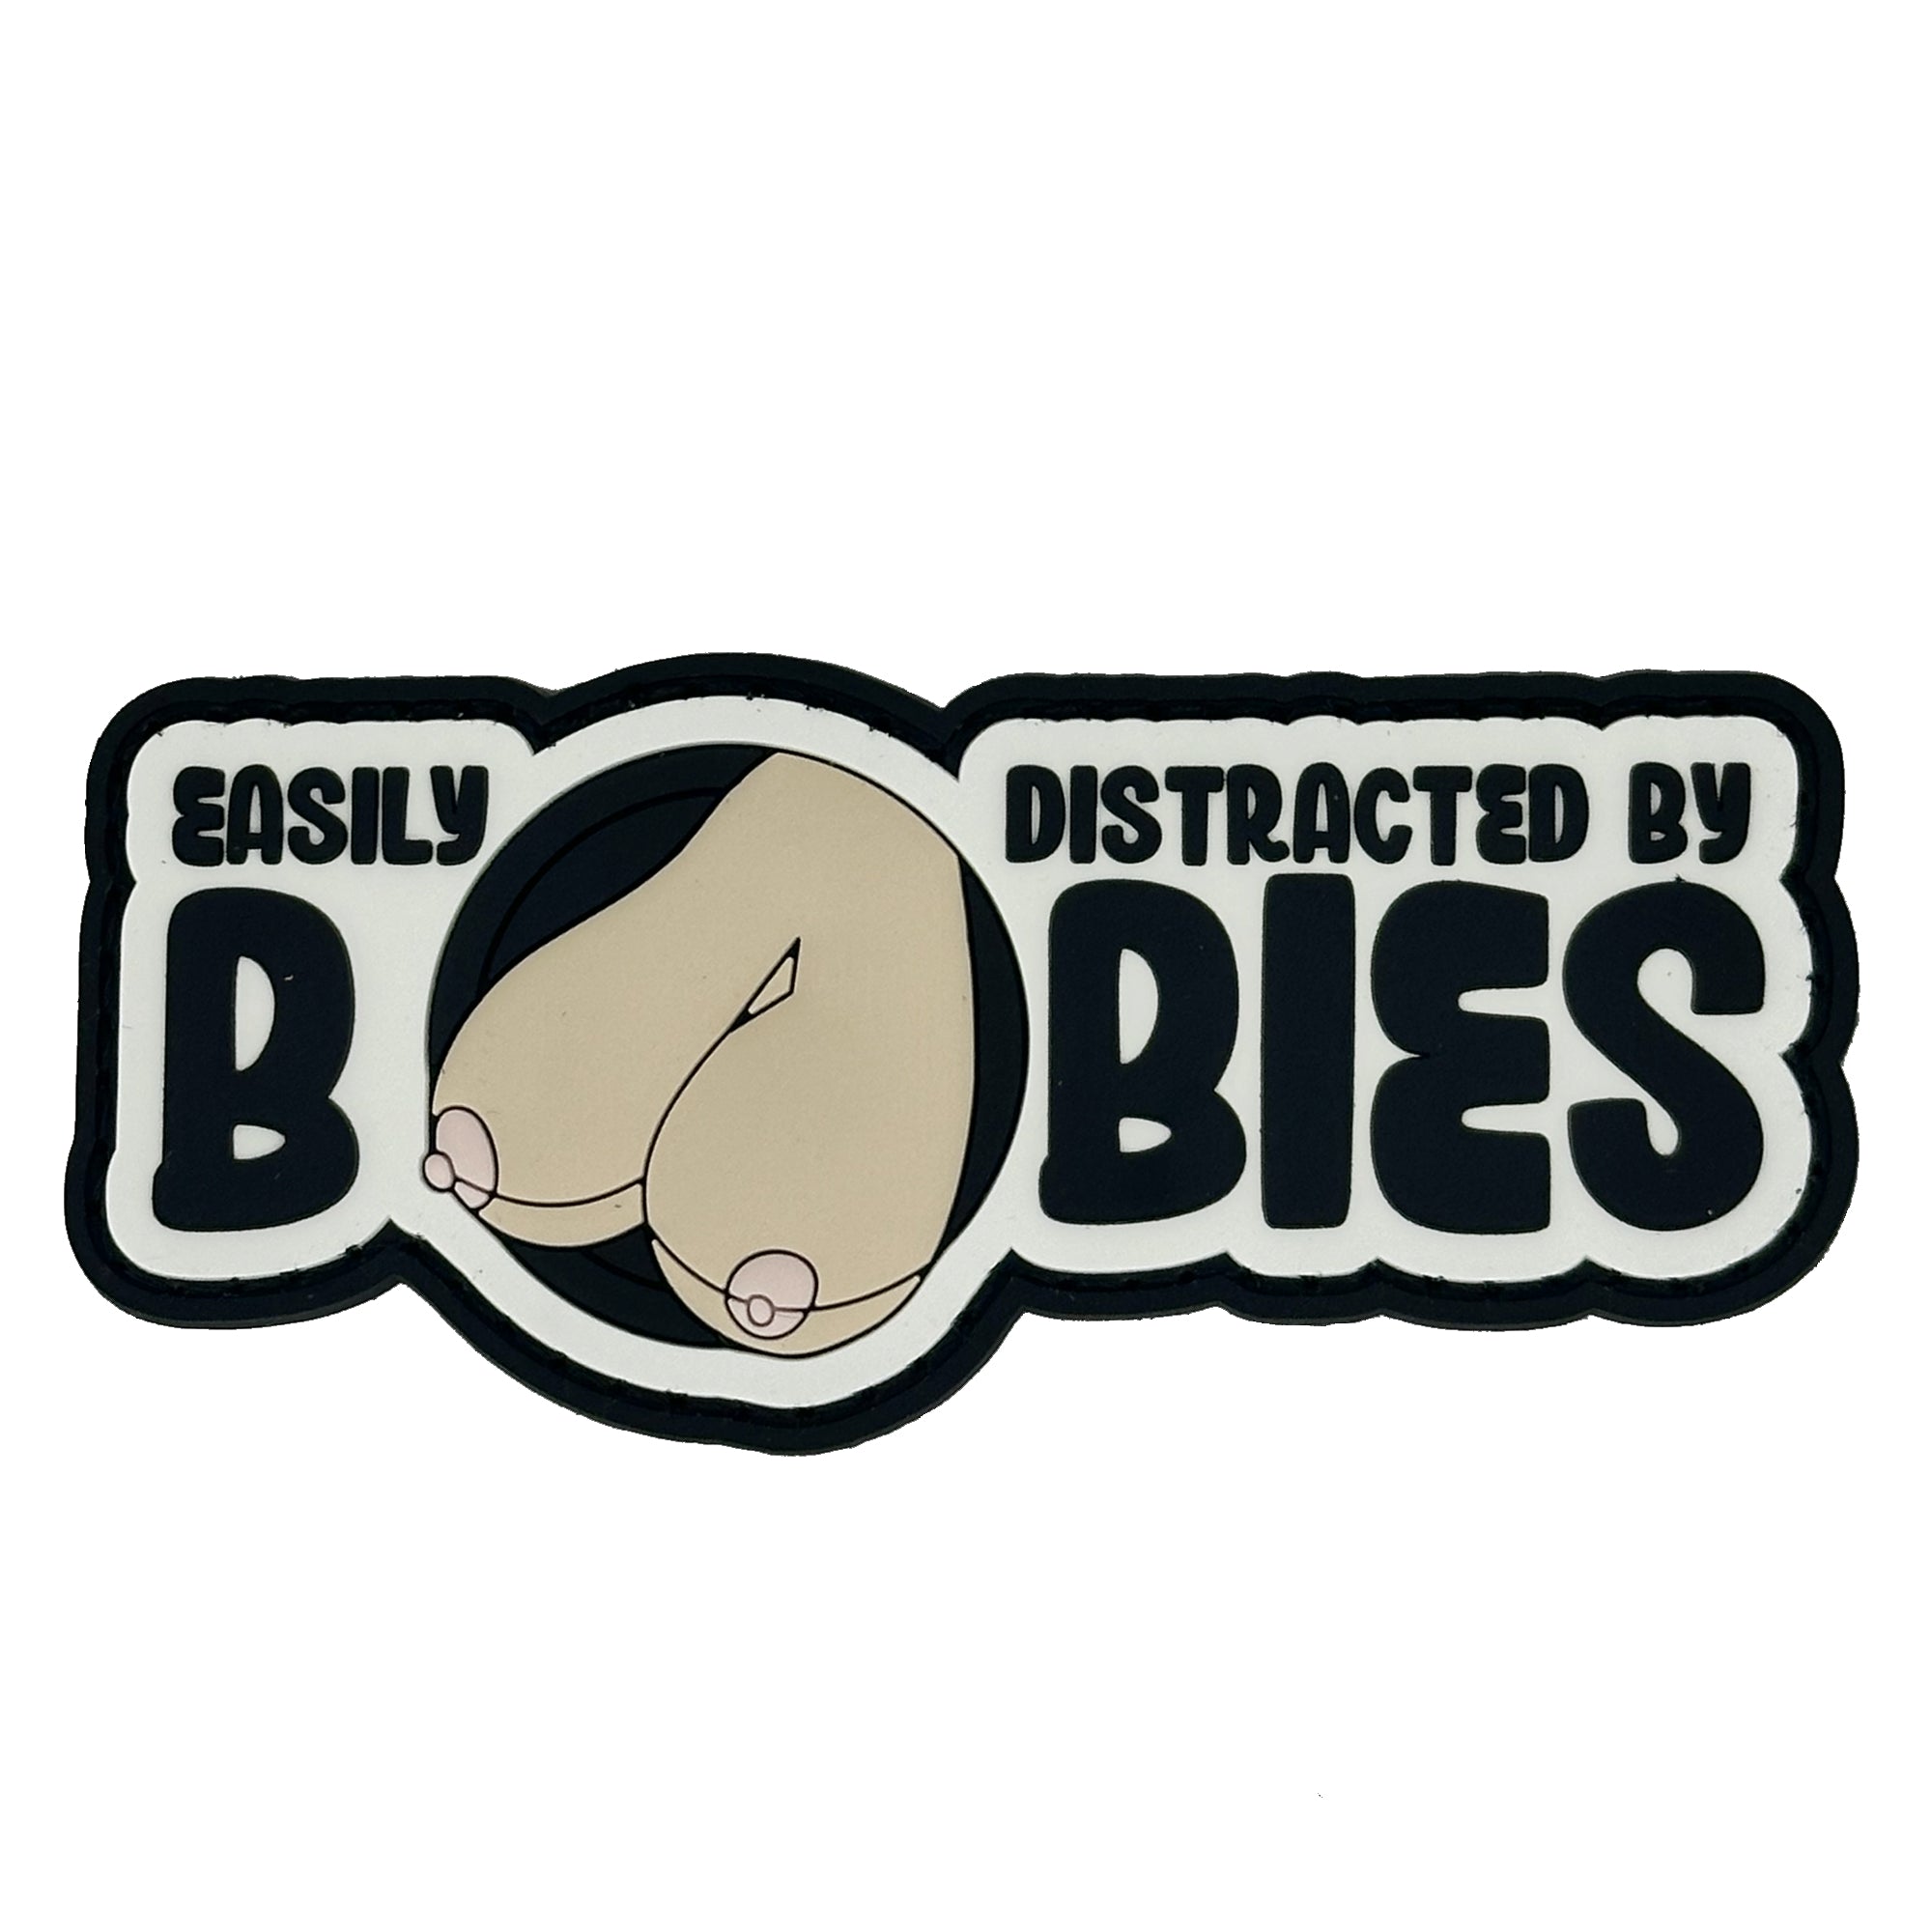 "Fun Size" - Easily Distracted By Boobies (Uncensored) - 4 inch PVC Patch